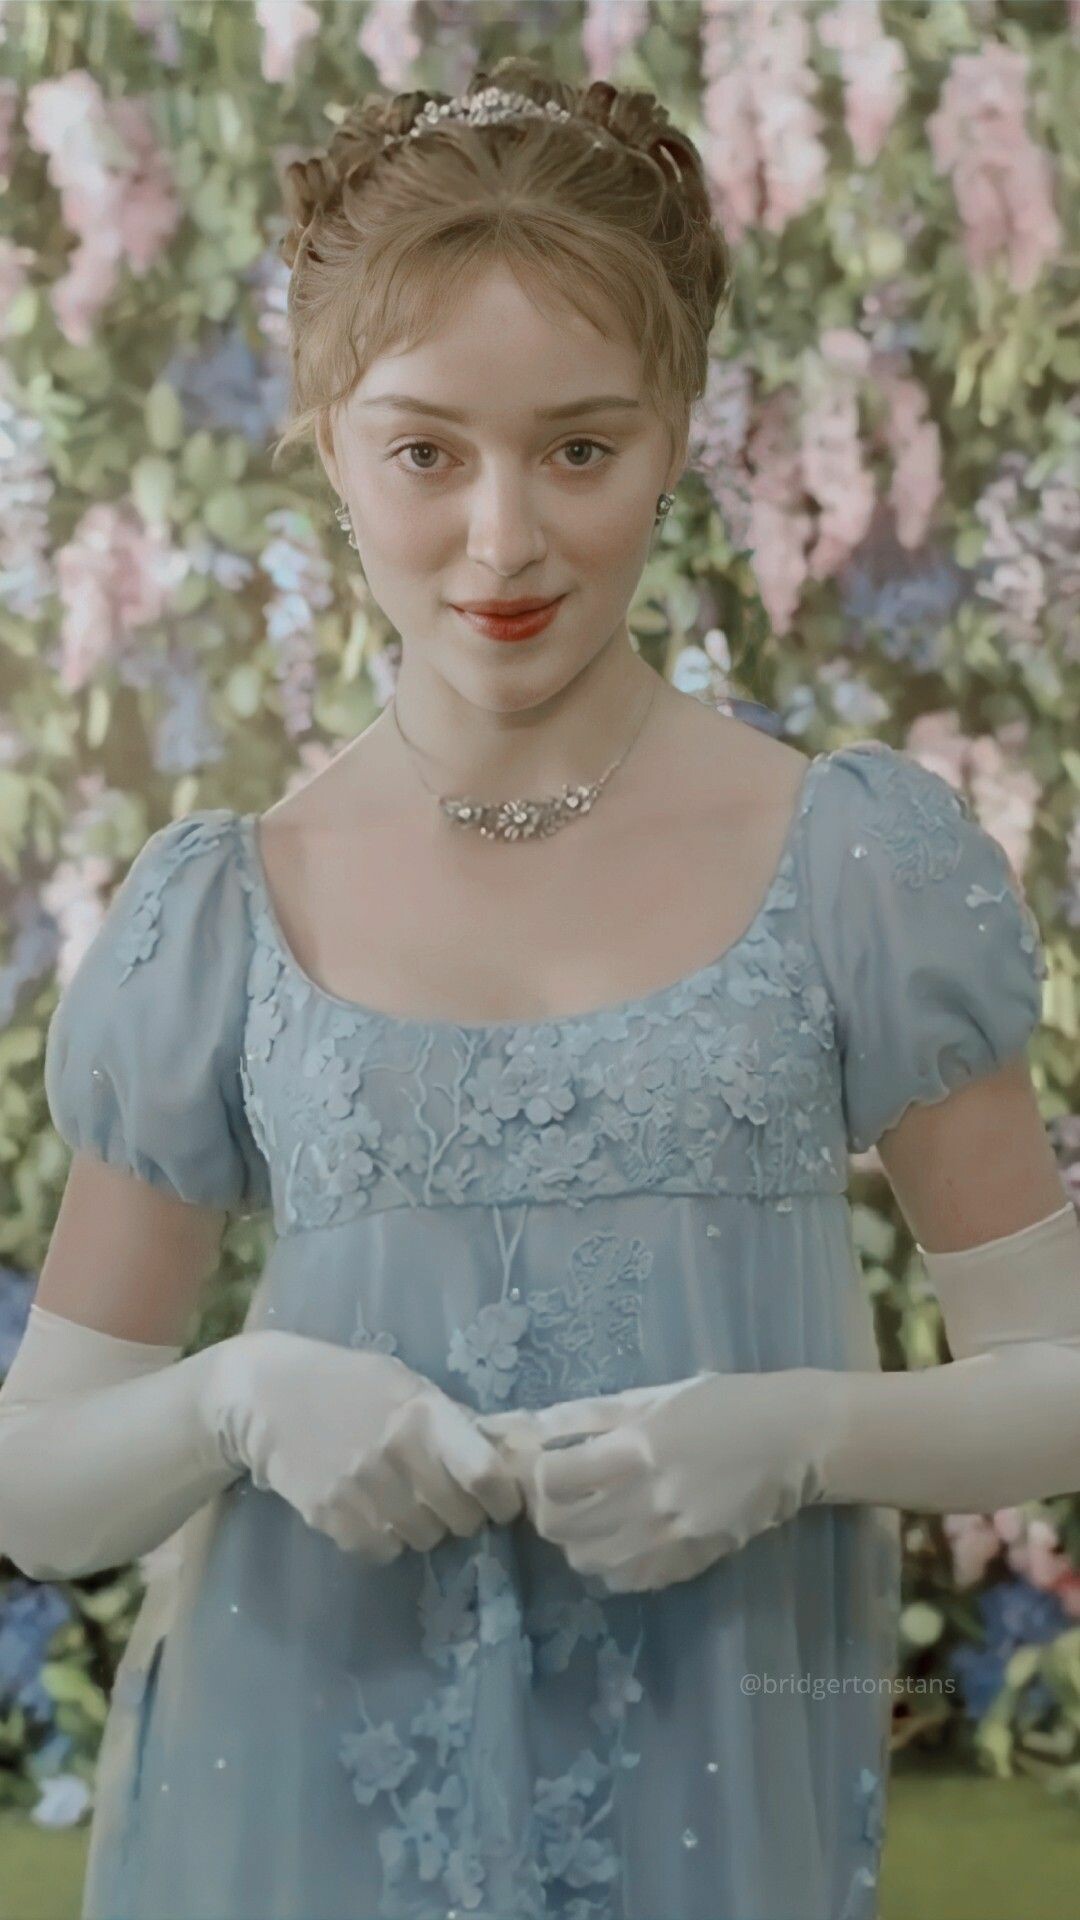 Bridgerton: Phoebe Dynevor as Daphne Basset, first appeared in the Diamond of the First Water. 1080x1920 Full HD Wallpaper.